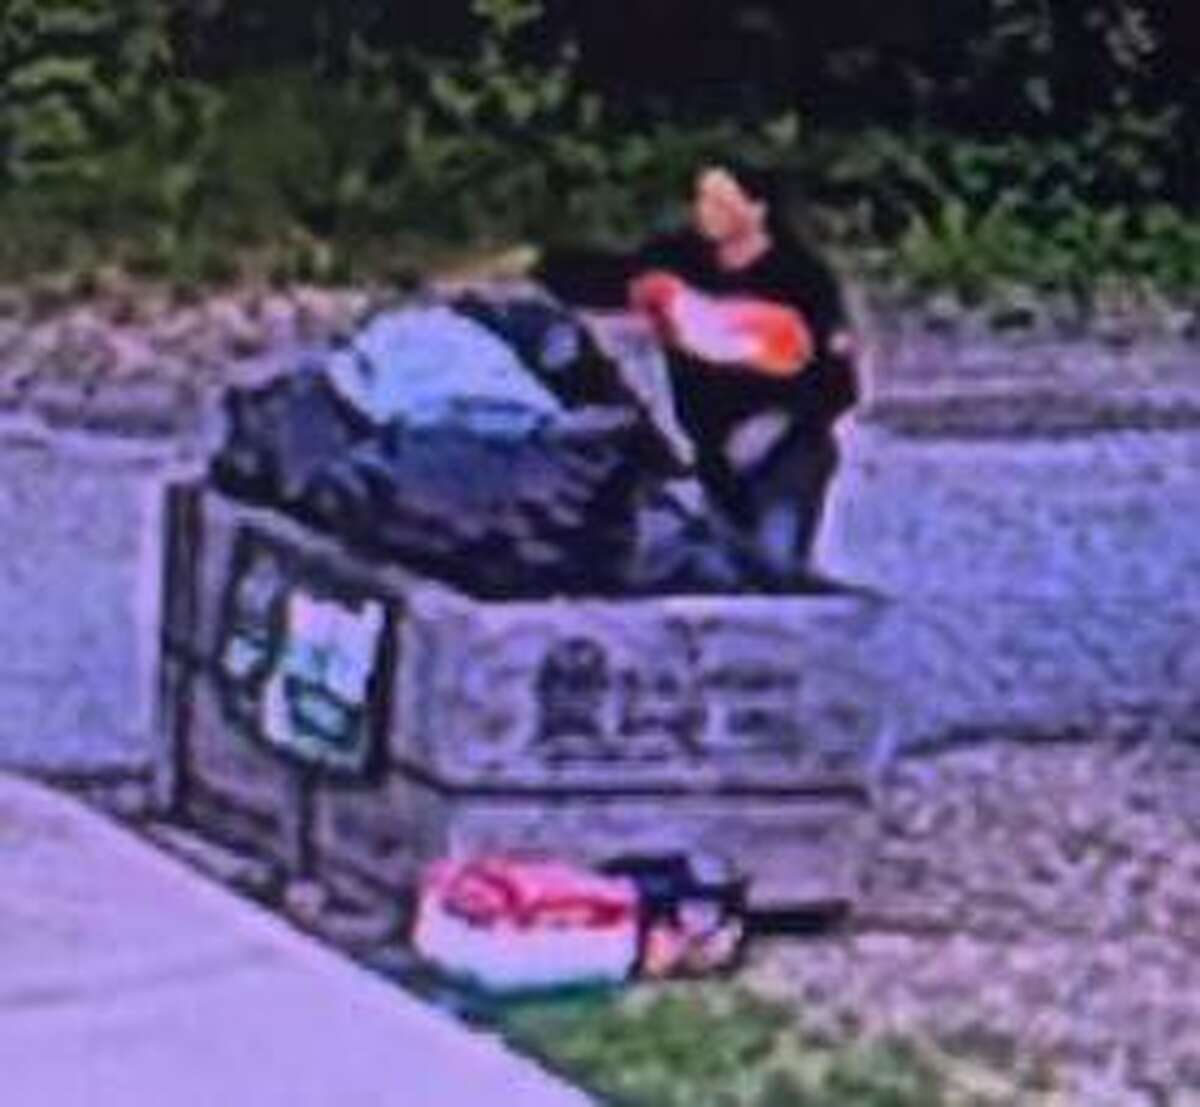 State police are searching for a man and woman accused of stealing donations from a nonprofit. Anyone with information about the suspects’ identities is asked to contact Troop D at 860-779-4900 or email Daryl.Manbeck@CT.gov.